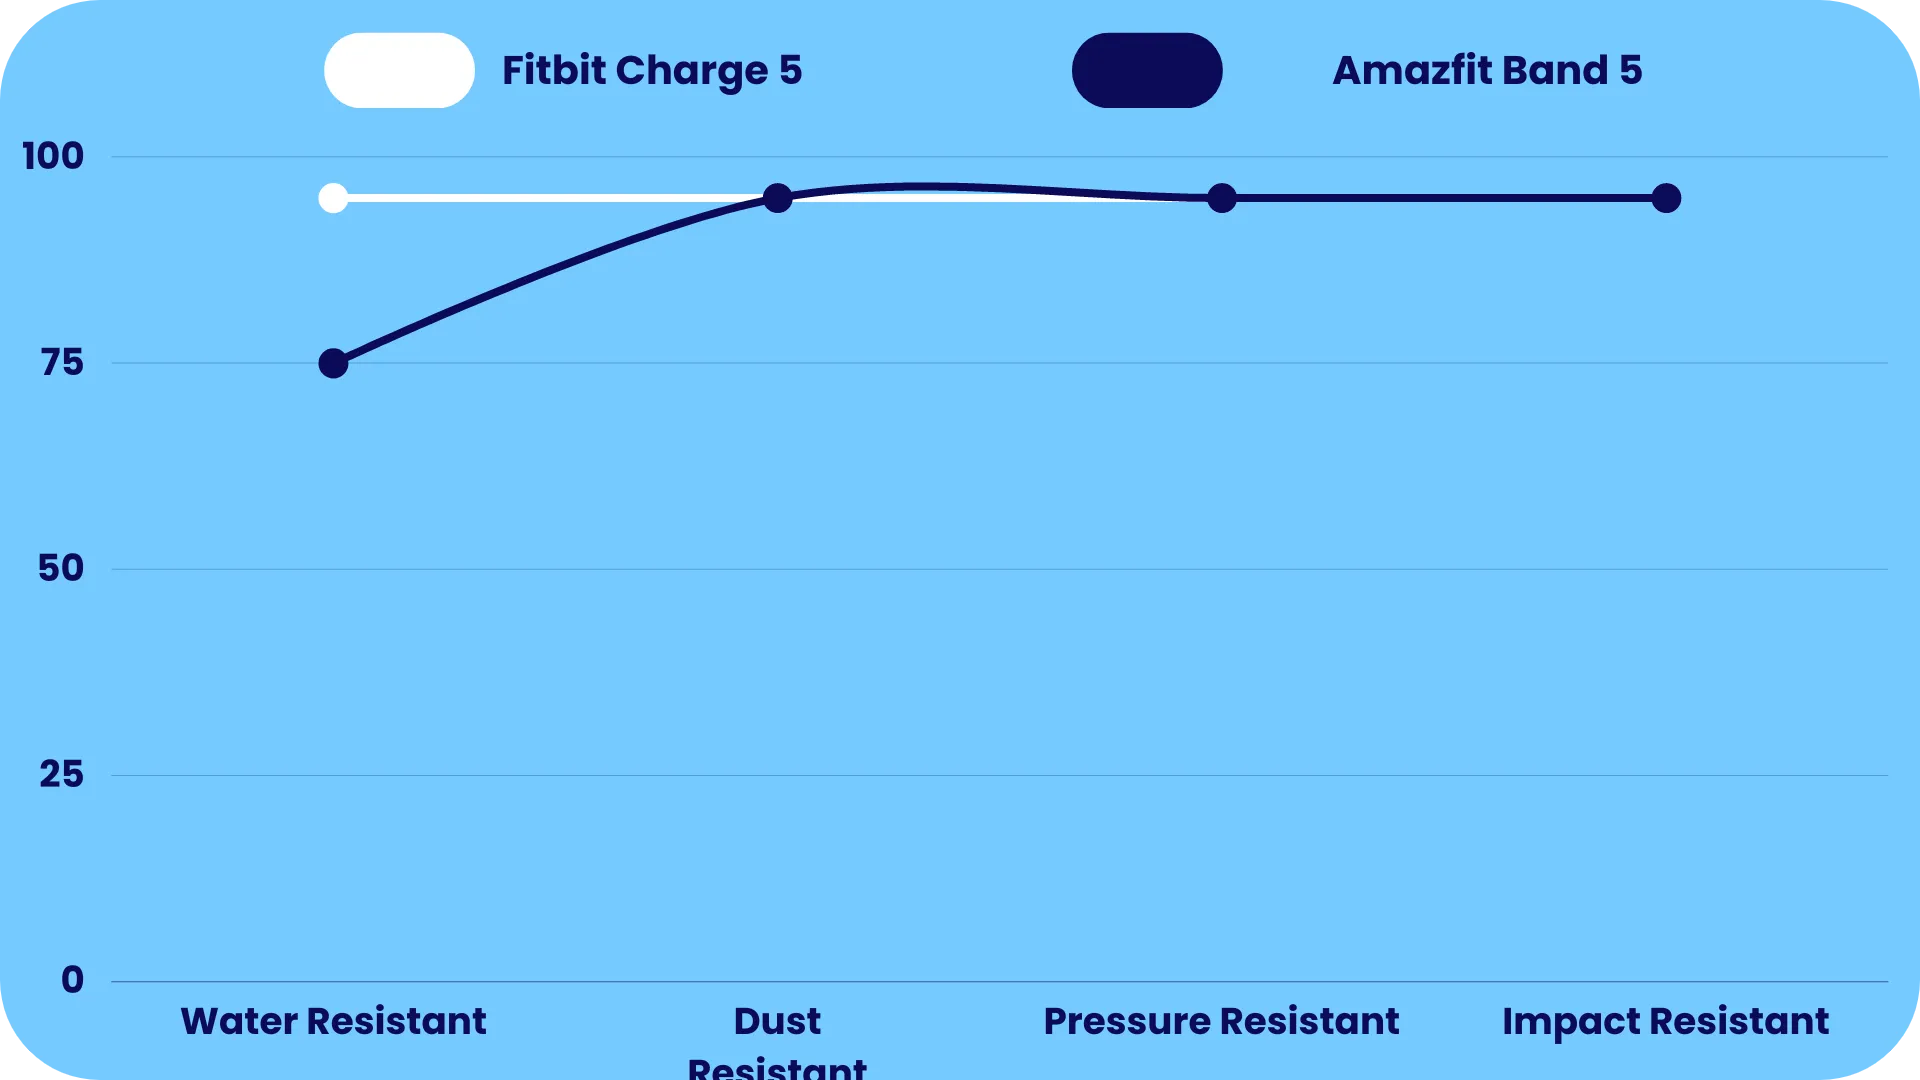 Resistivity Comparison of Fitbit Charge 5 & Amazfit Band 5